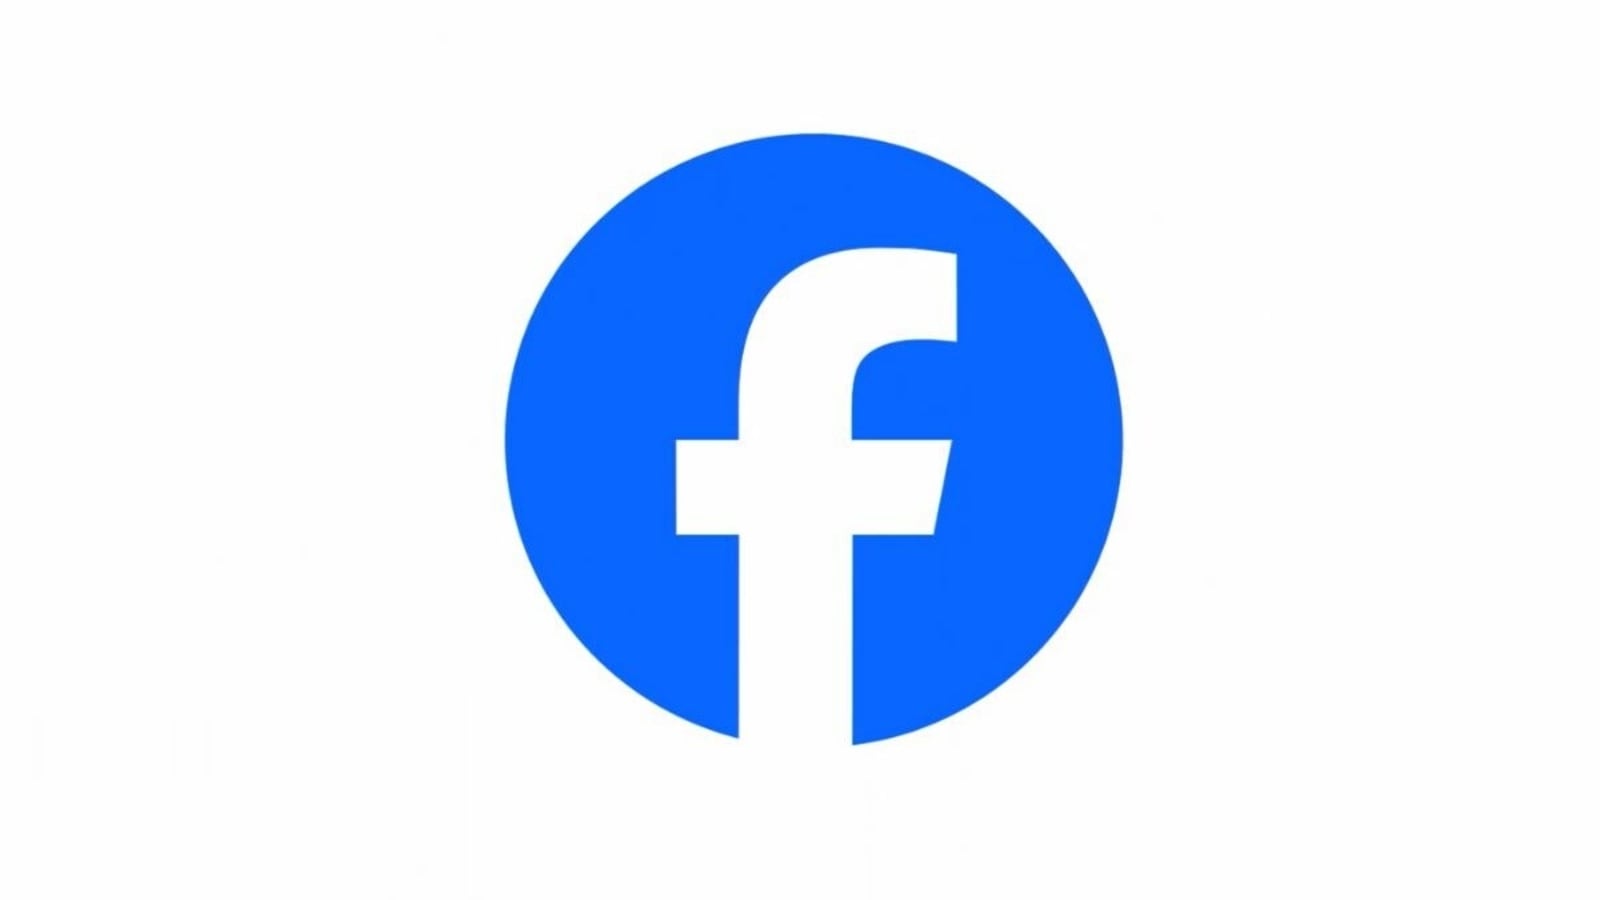 Did Facebook really change its logo? See if you can spot the difference